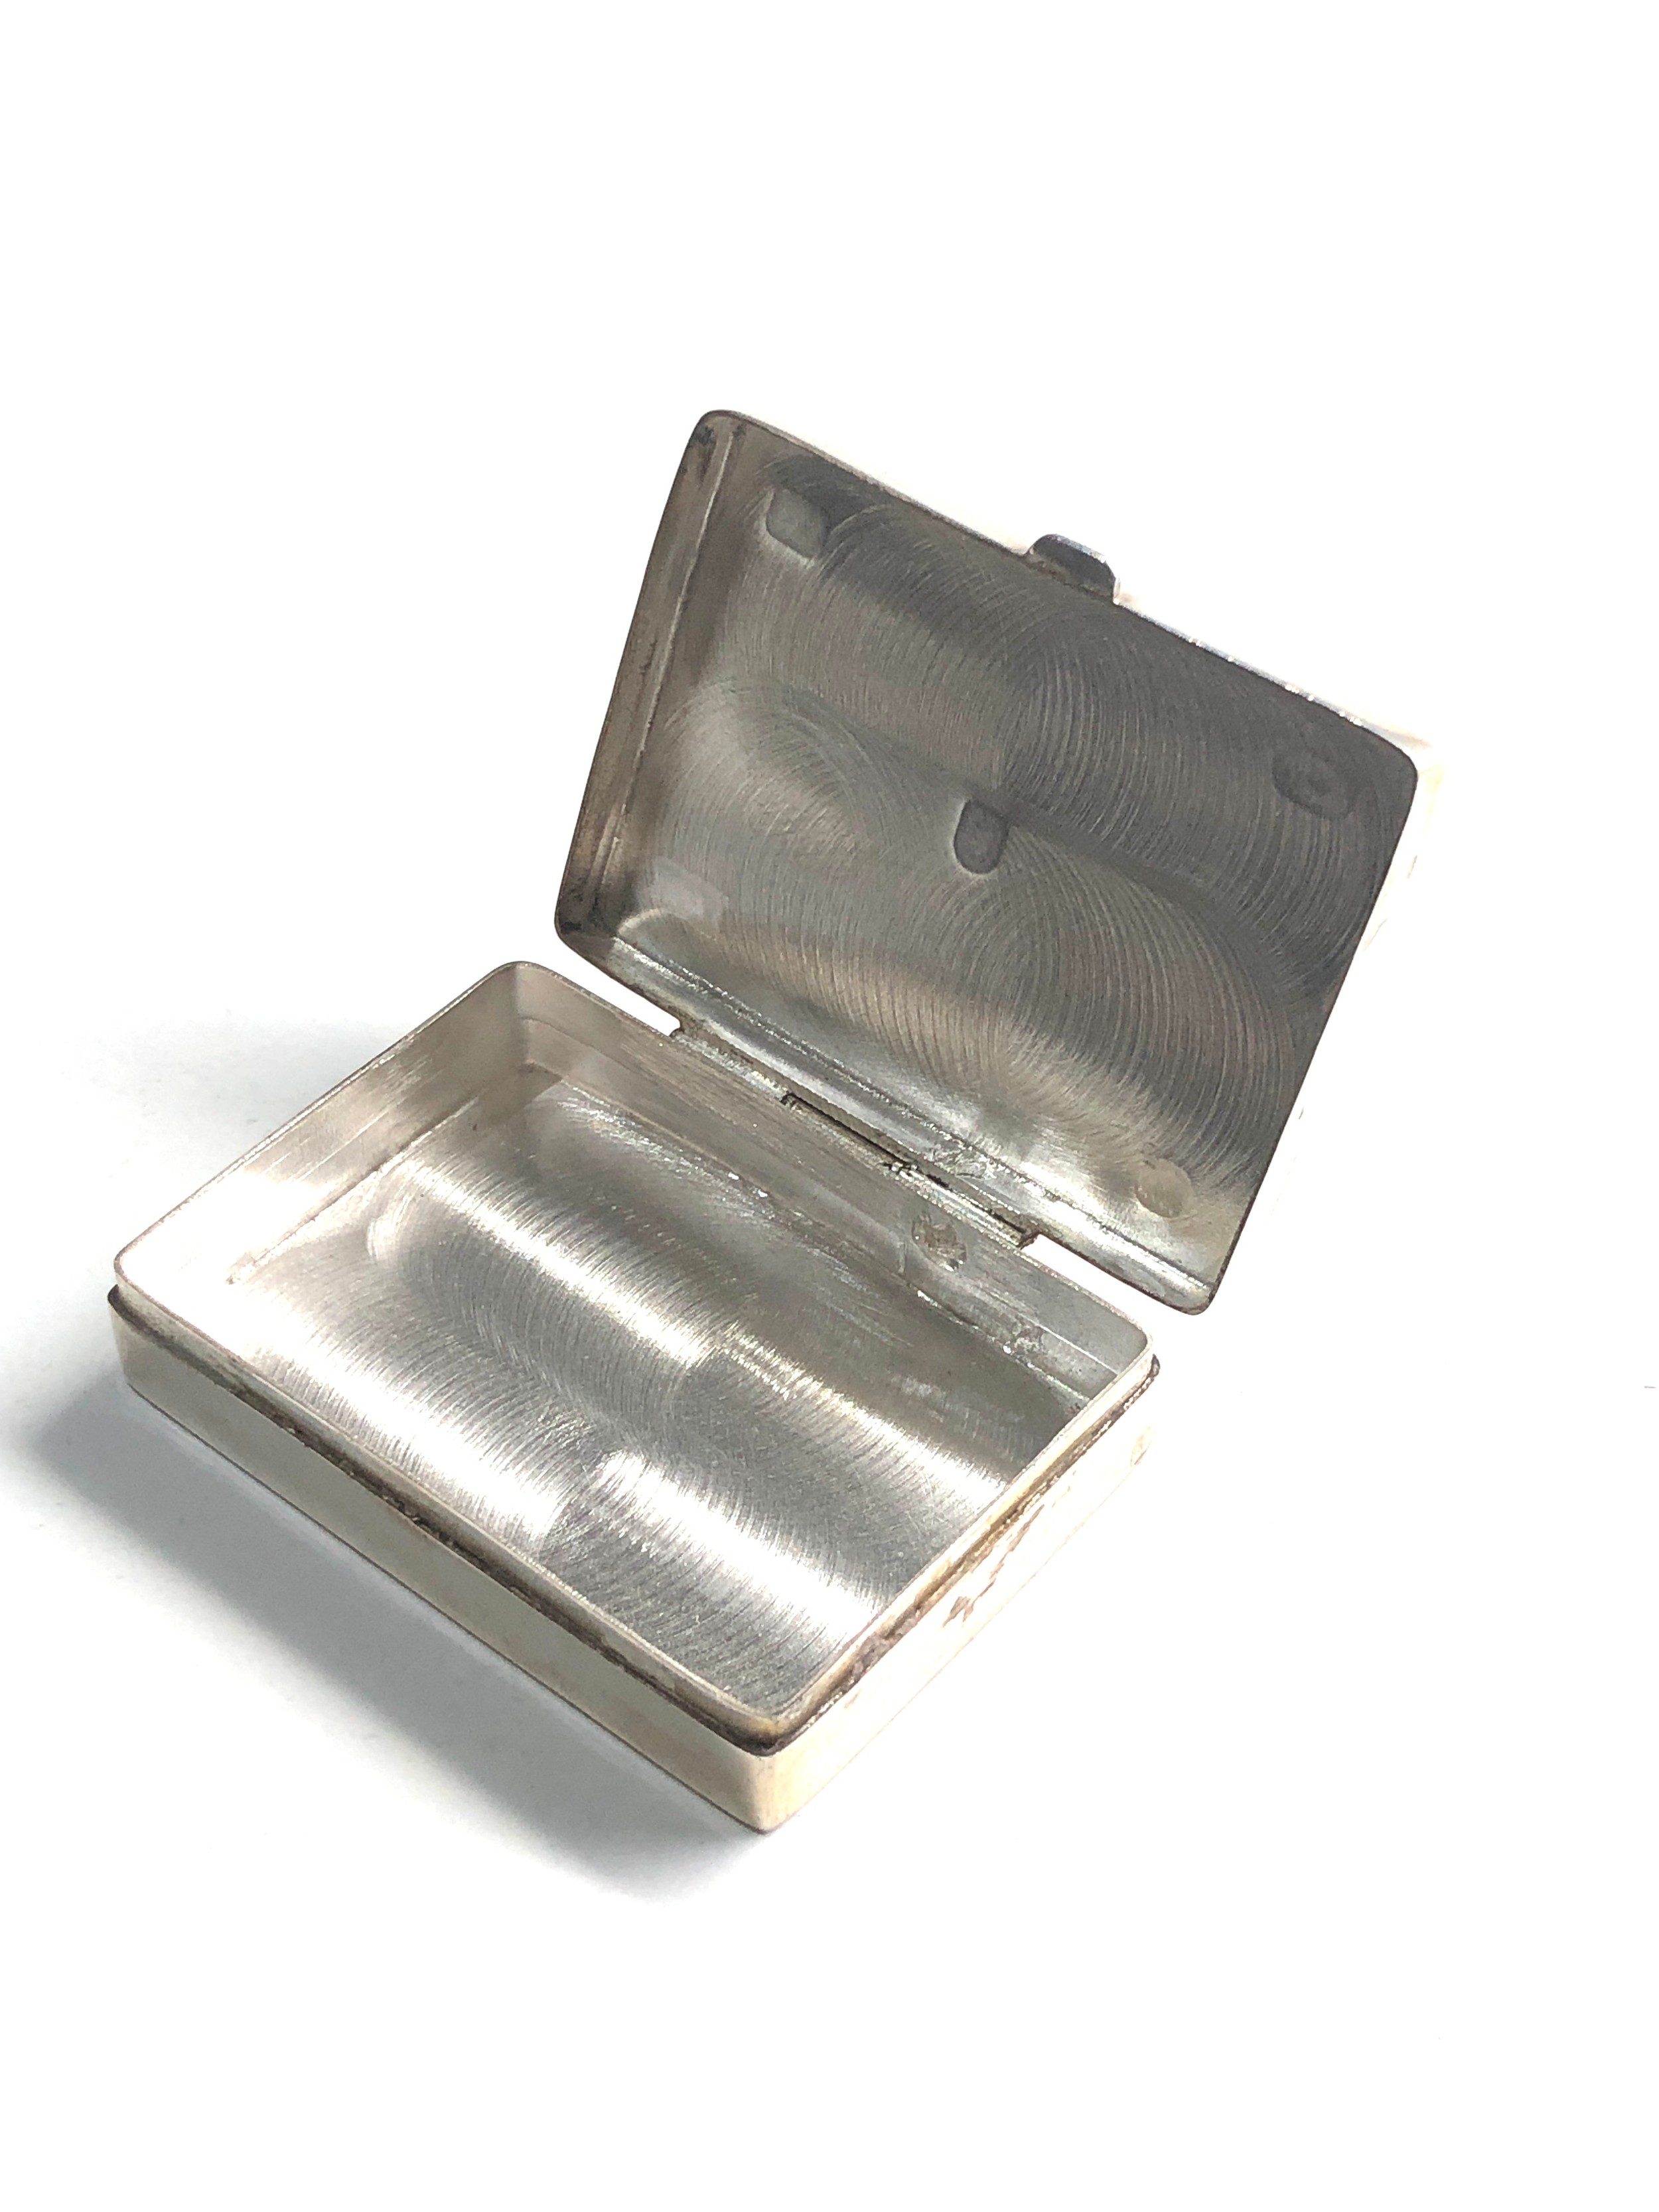 Vintage silver pill / snuff box - Image 3 of 3